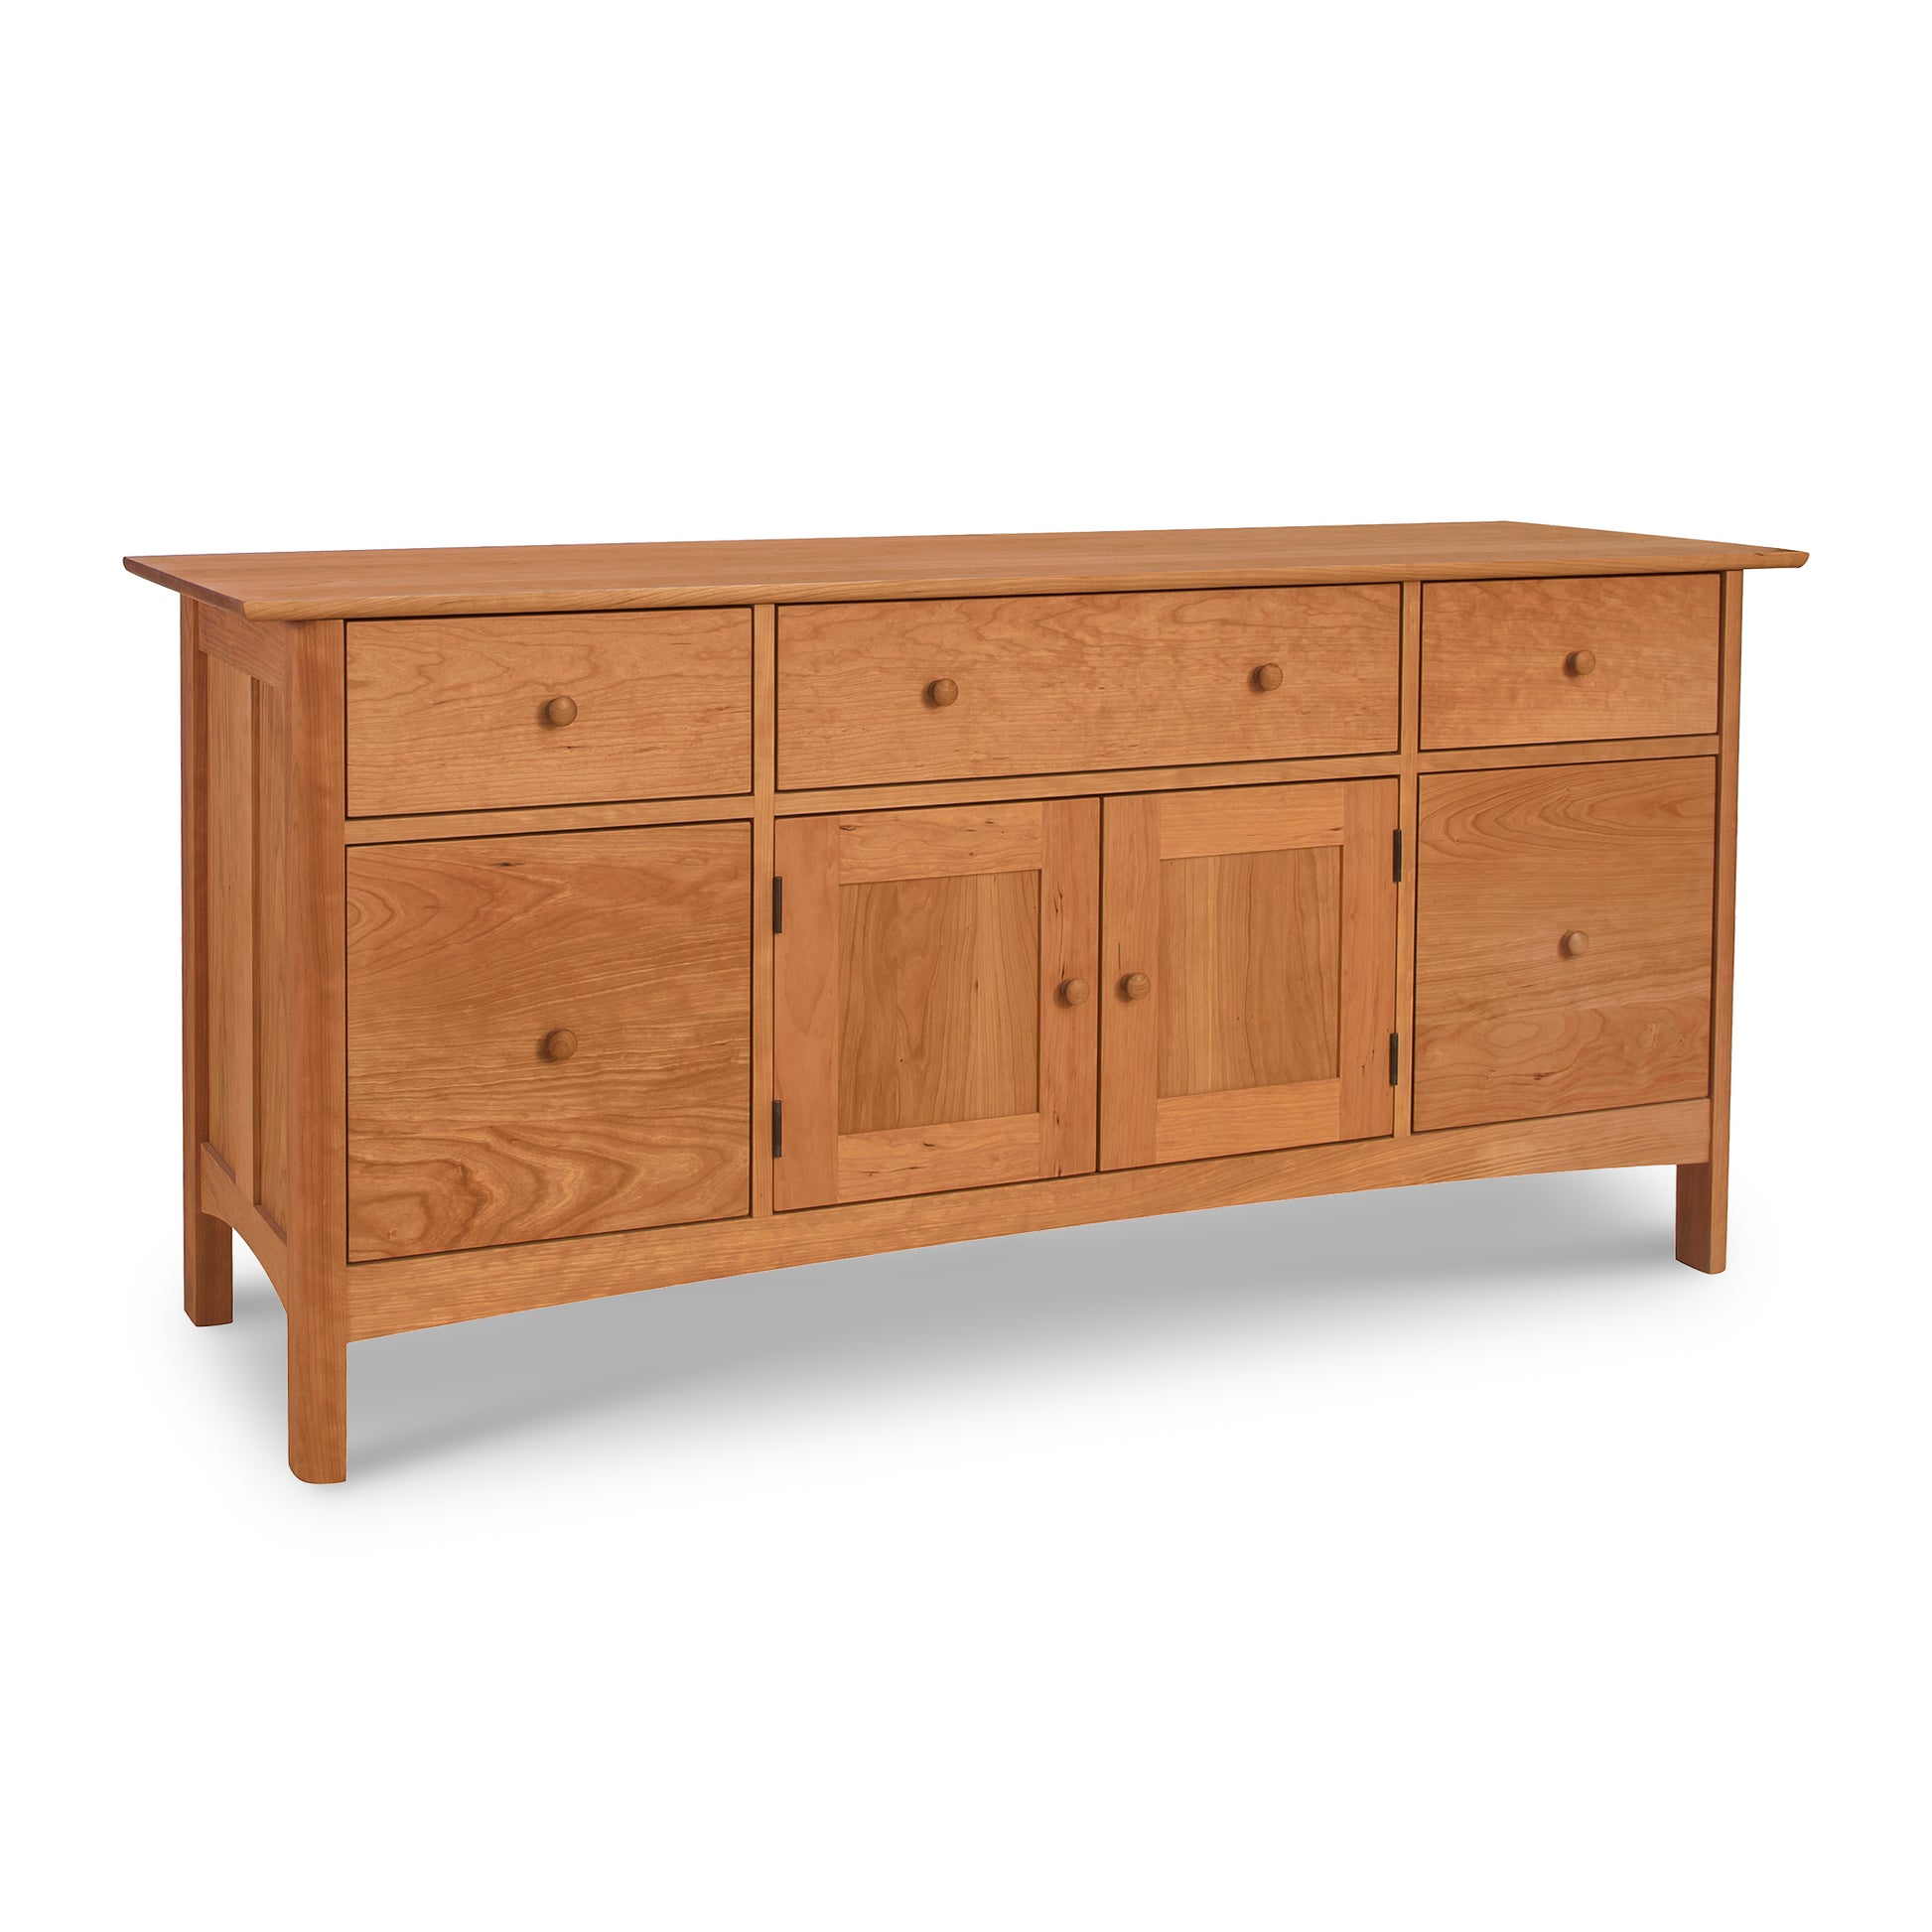 A handmade wooden Heartwood Shaker File Credenza with drawers and doors in a luxury shaker style by Vermont Furniture Designs.